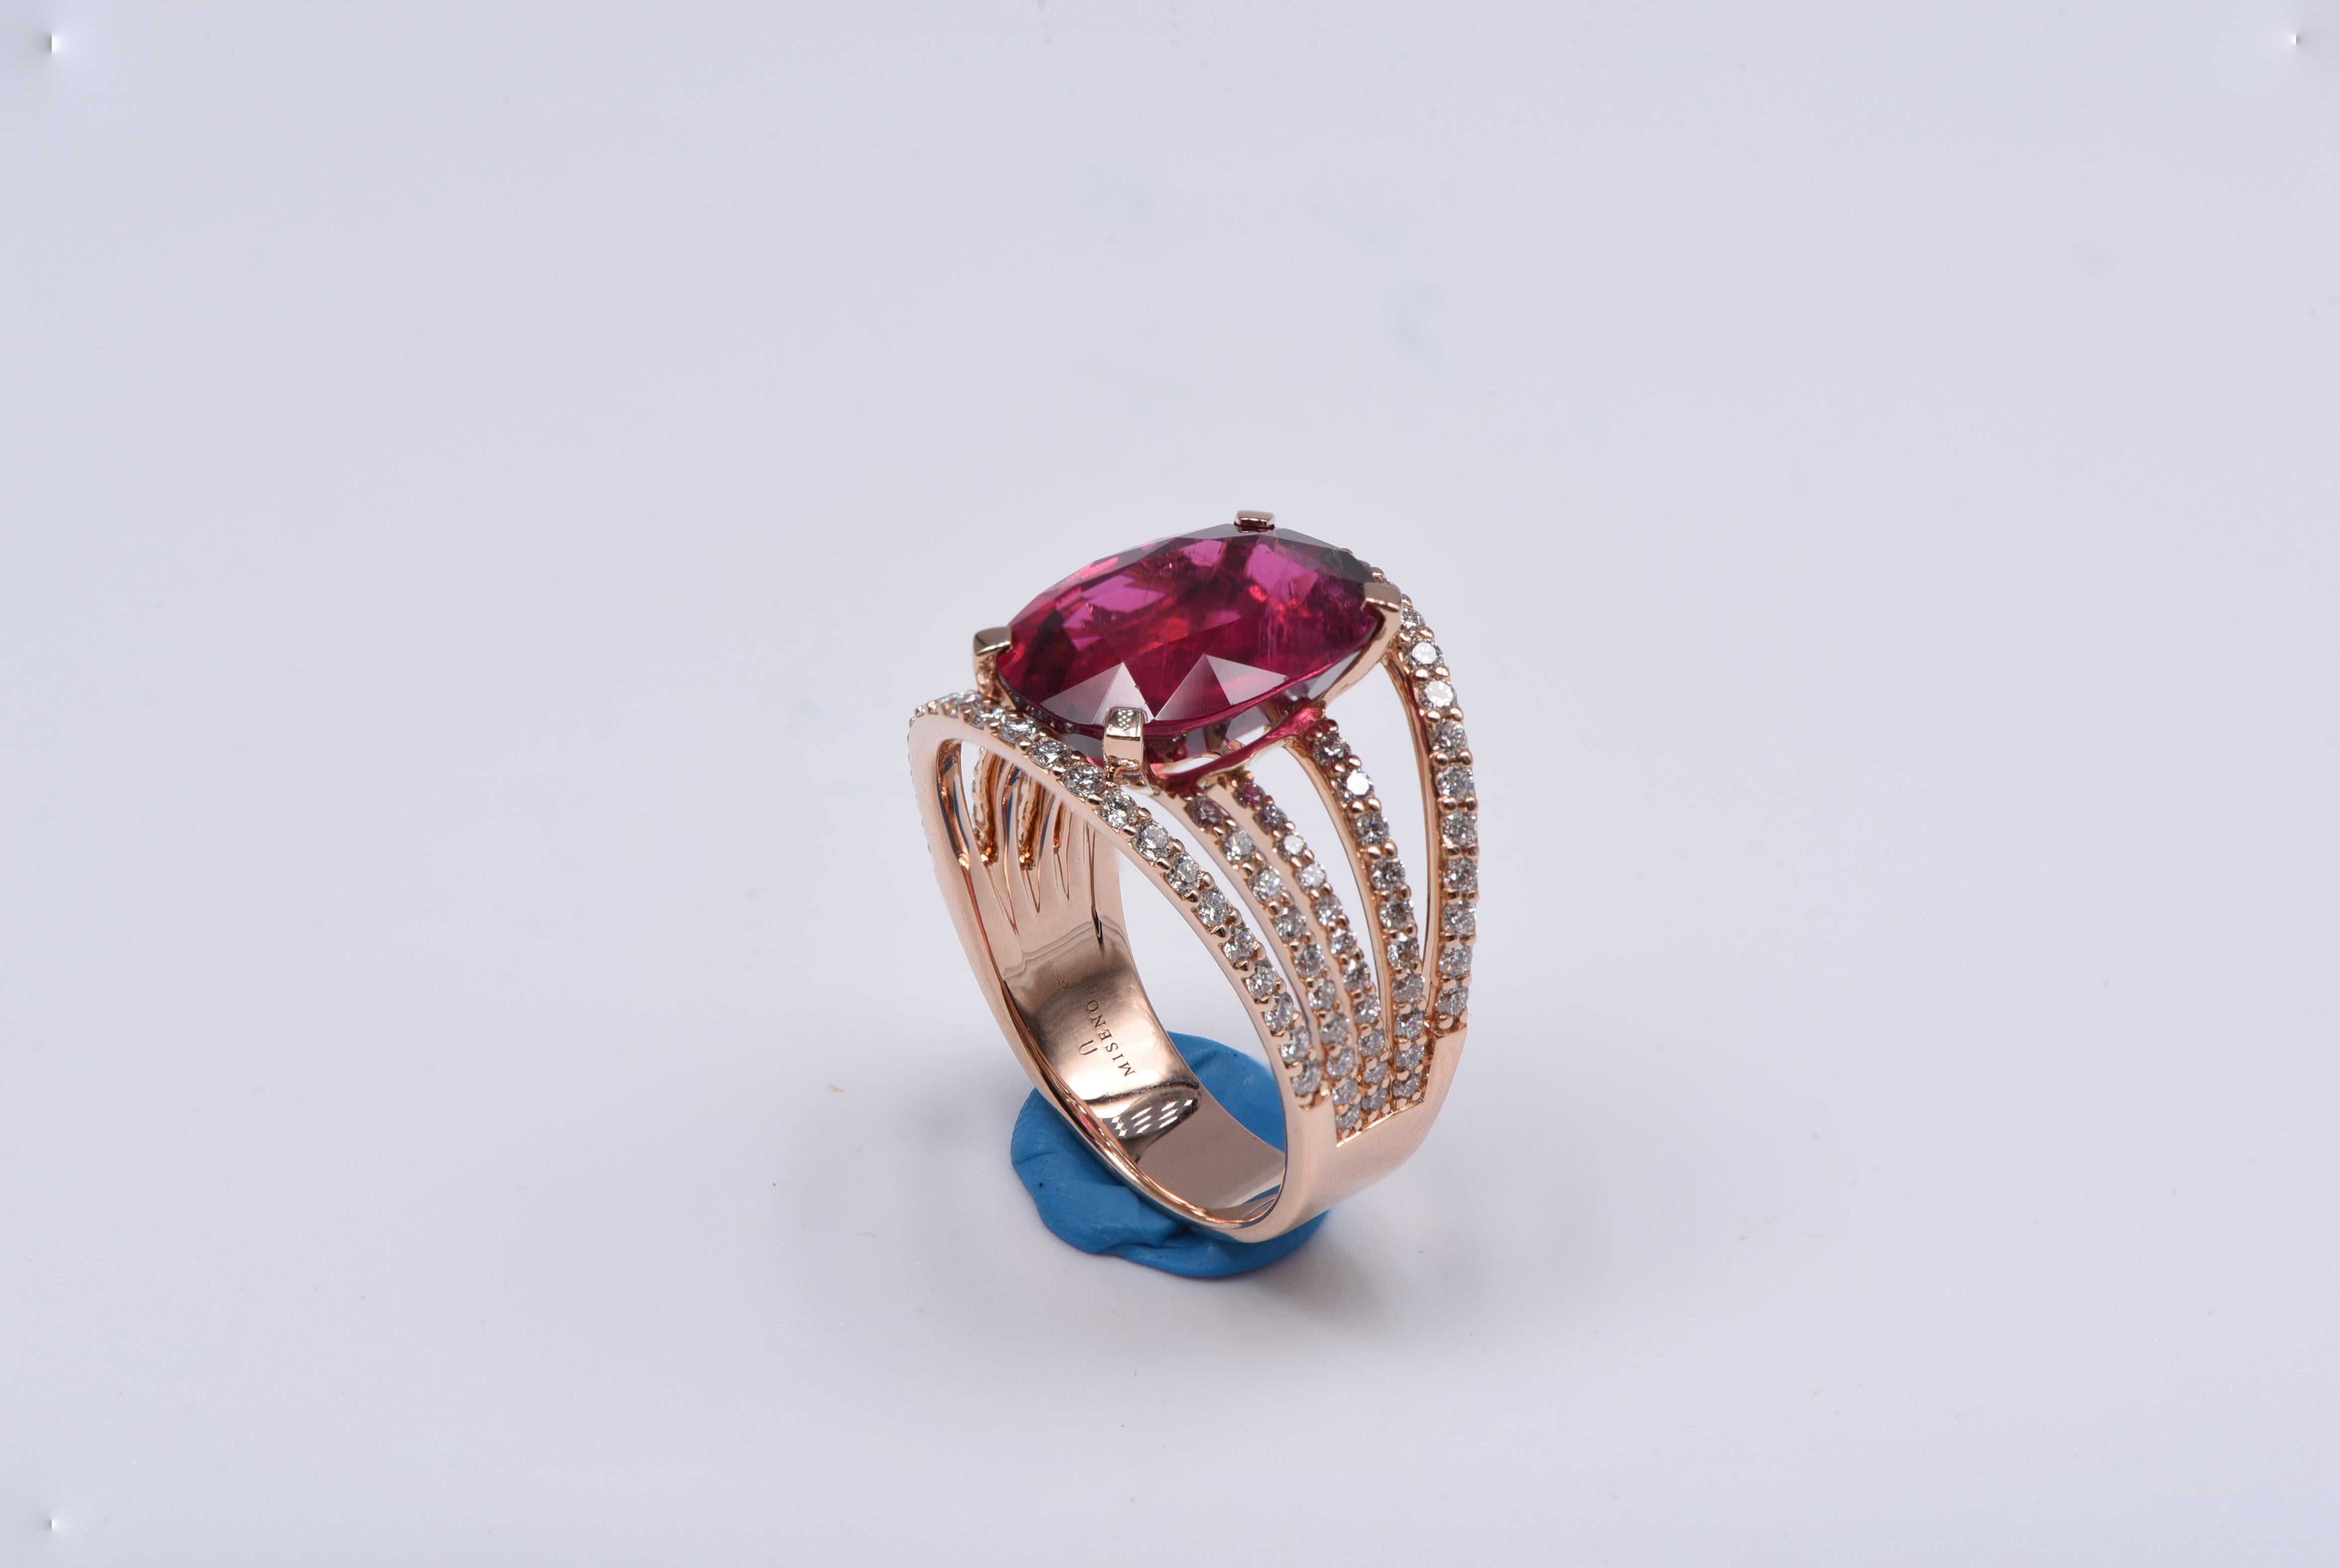 18kt rose gold ring with white diamonds (approx. 1.14 carats) and oval shaped rubellite (approx. 6.74 carats) center stone